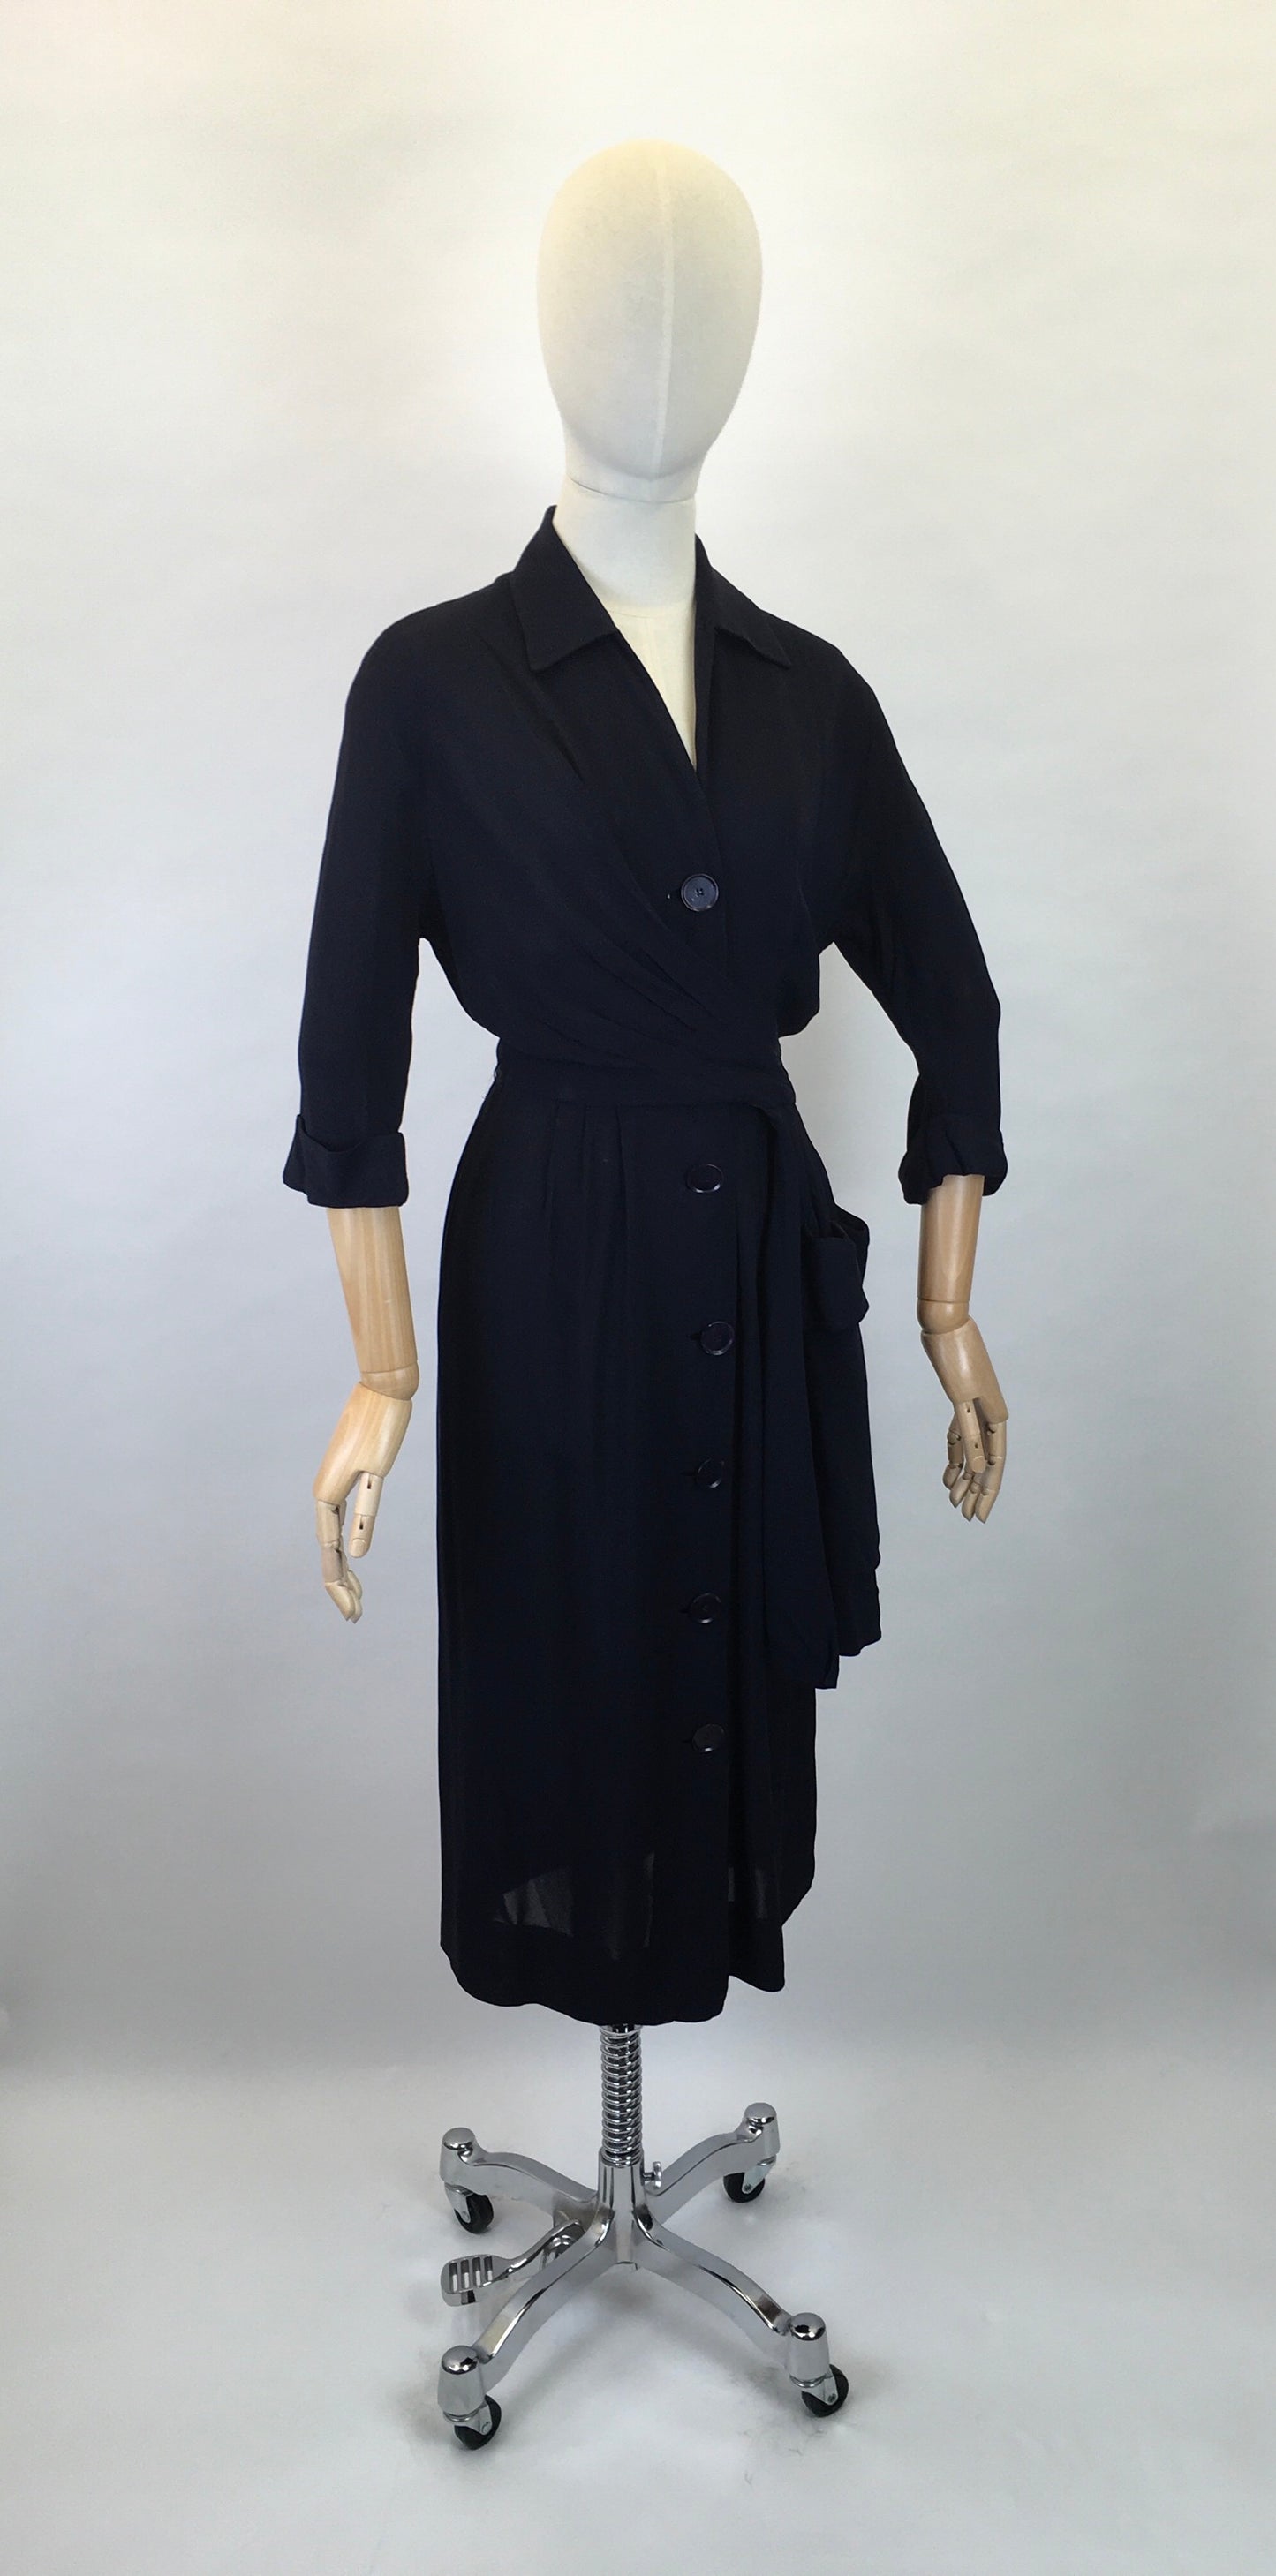 Original 1940s Stunning ‘ Herbert Stonheim ‘ Couture Dress - In a Navy Sheer Rayon with Wrap Hip Swag and Pocket